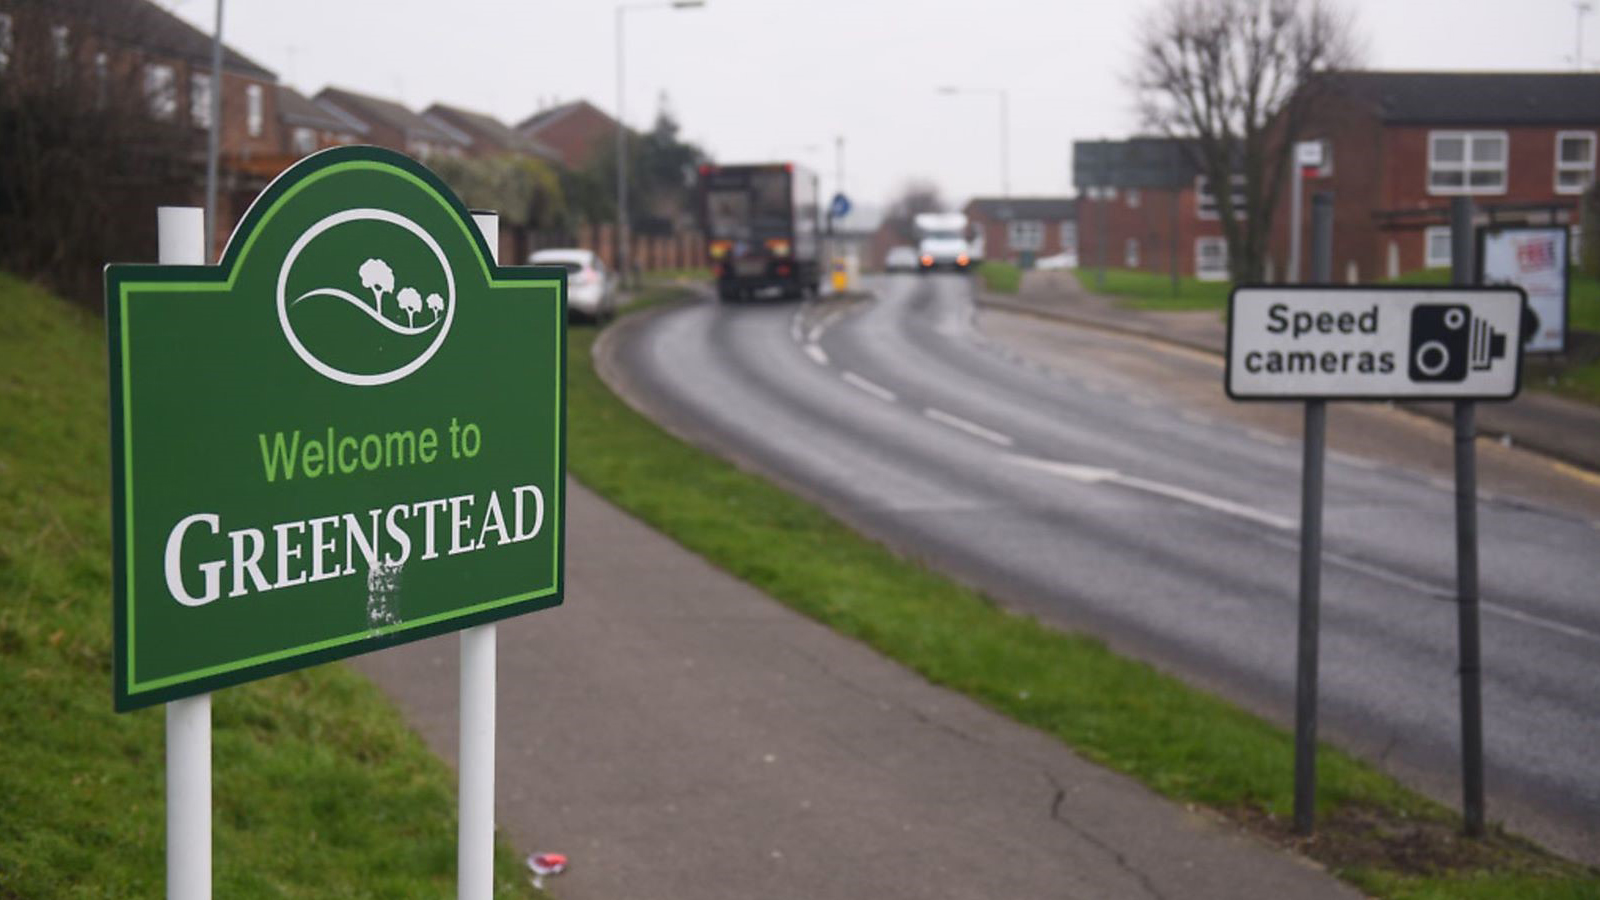 Sign saying "welcome to Greenstead" next to a road leading to a housing estate